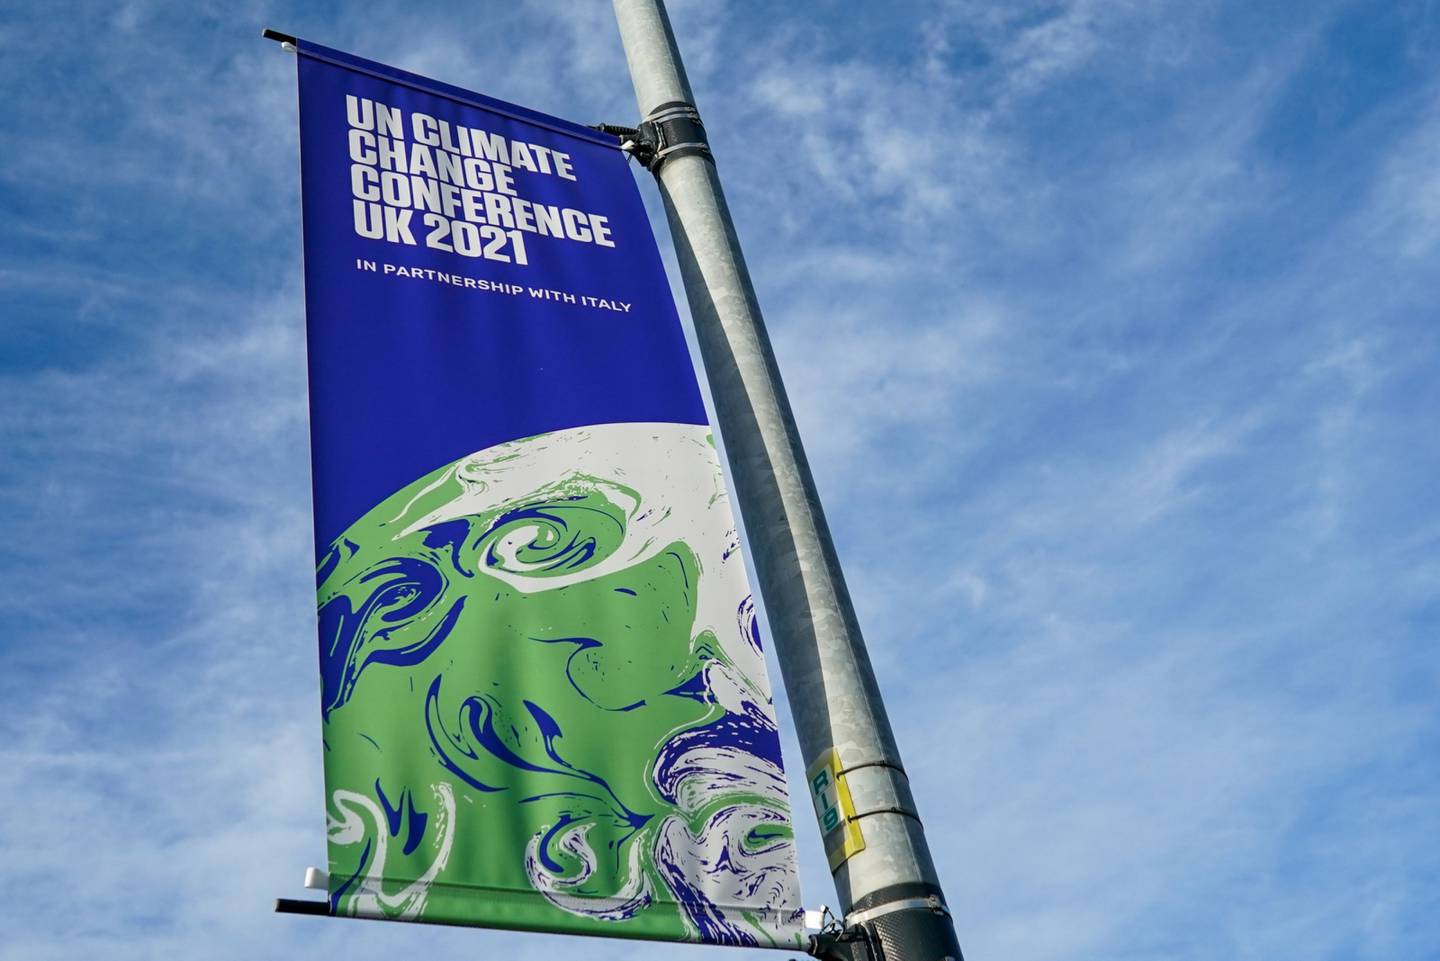 A banner advertisings the upcoming COP26 climate talks in Glasgow, U.K., on Wednesday, Oct. 20, 2021. Glasgow will welcome world leaders and thousands of attendees for the crucial United Nations summit on climate change in November.dfd